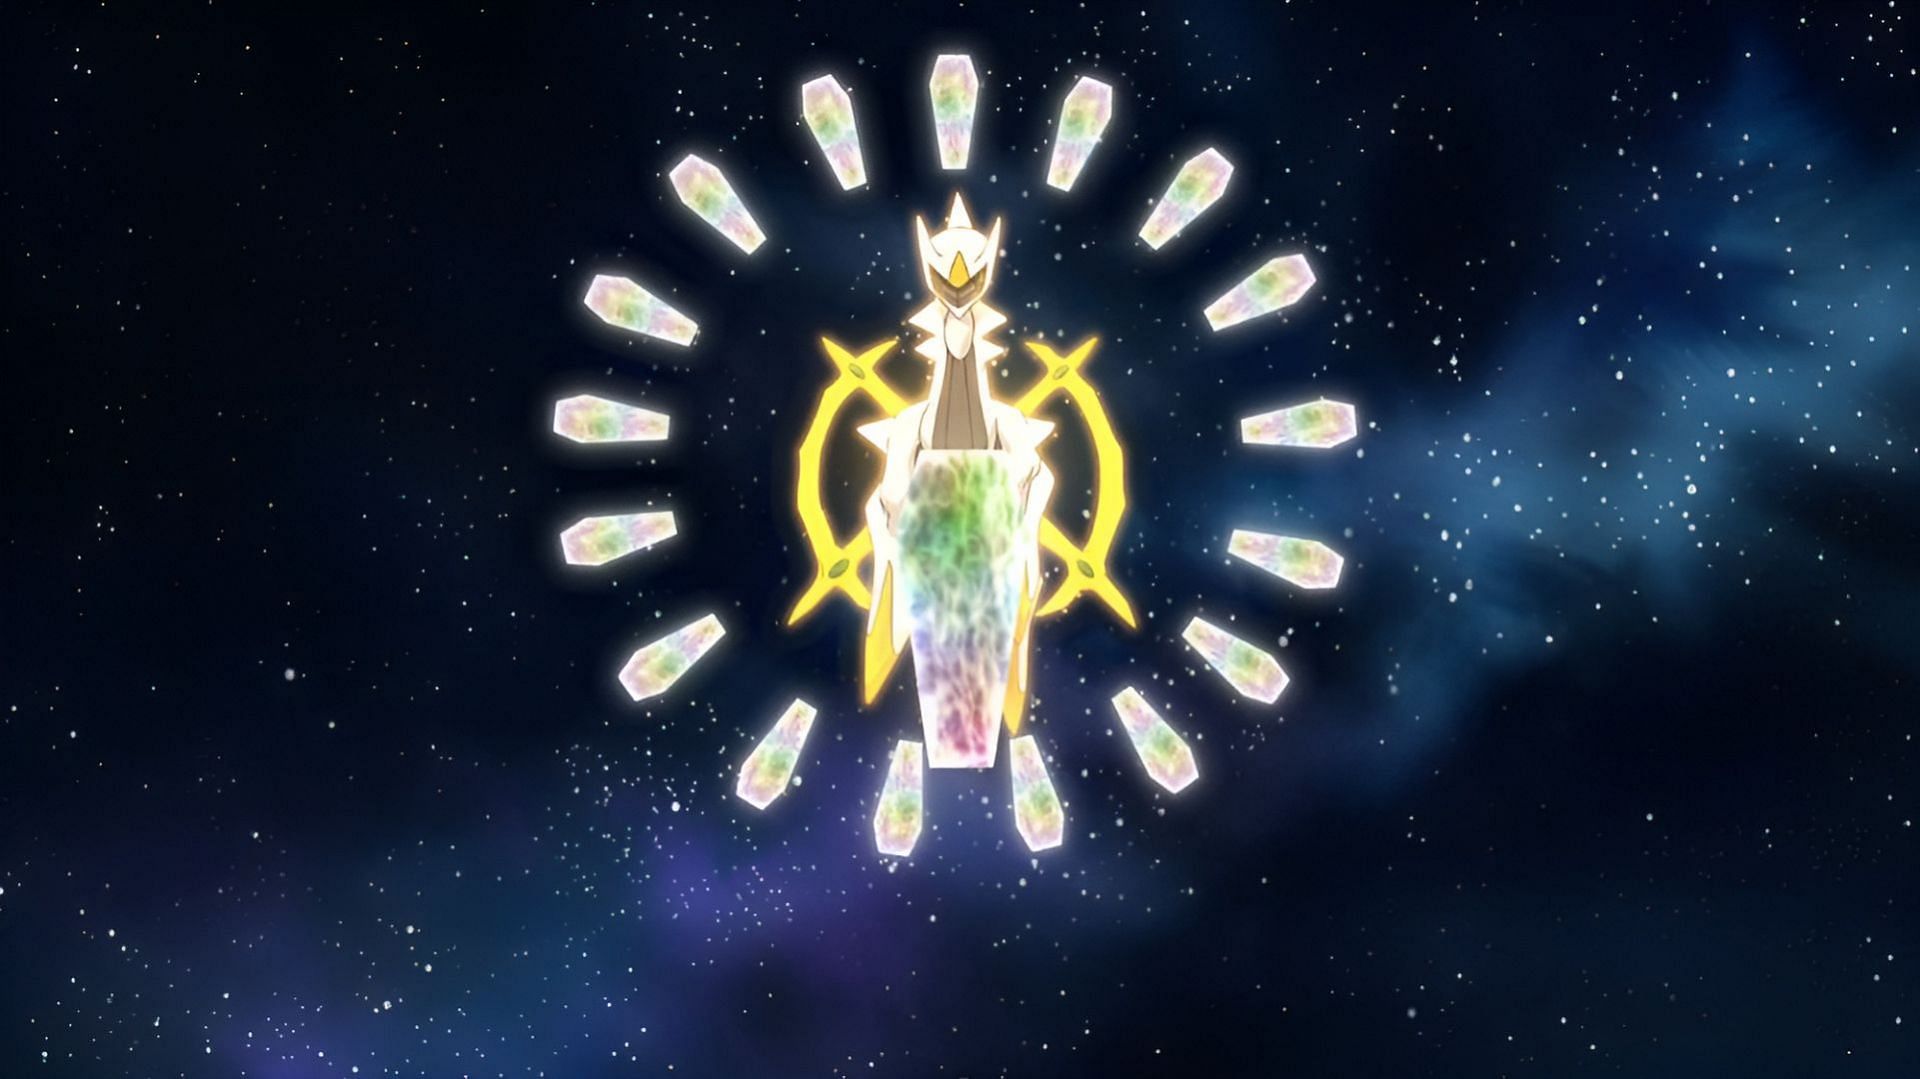 Arceus surrounded by its Plates in the Pokemon anime (Image via The Pokemon Company)